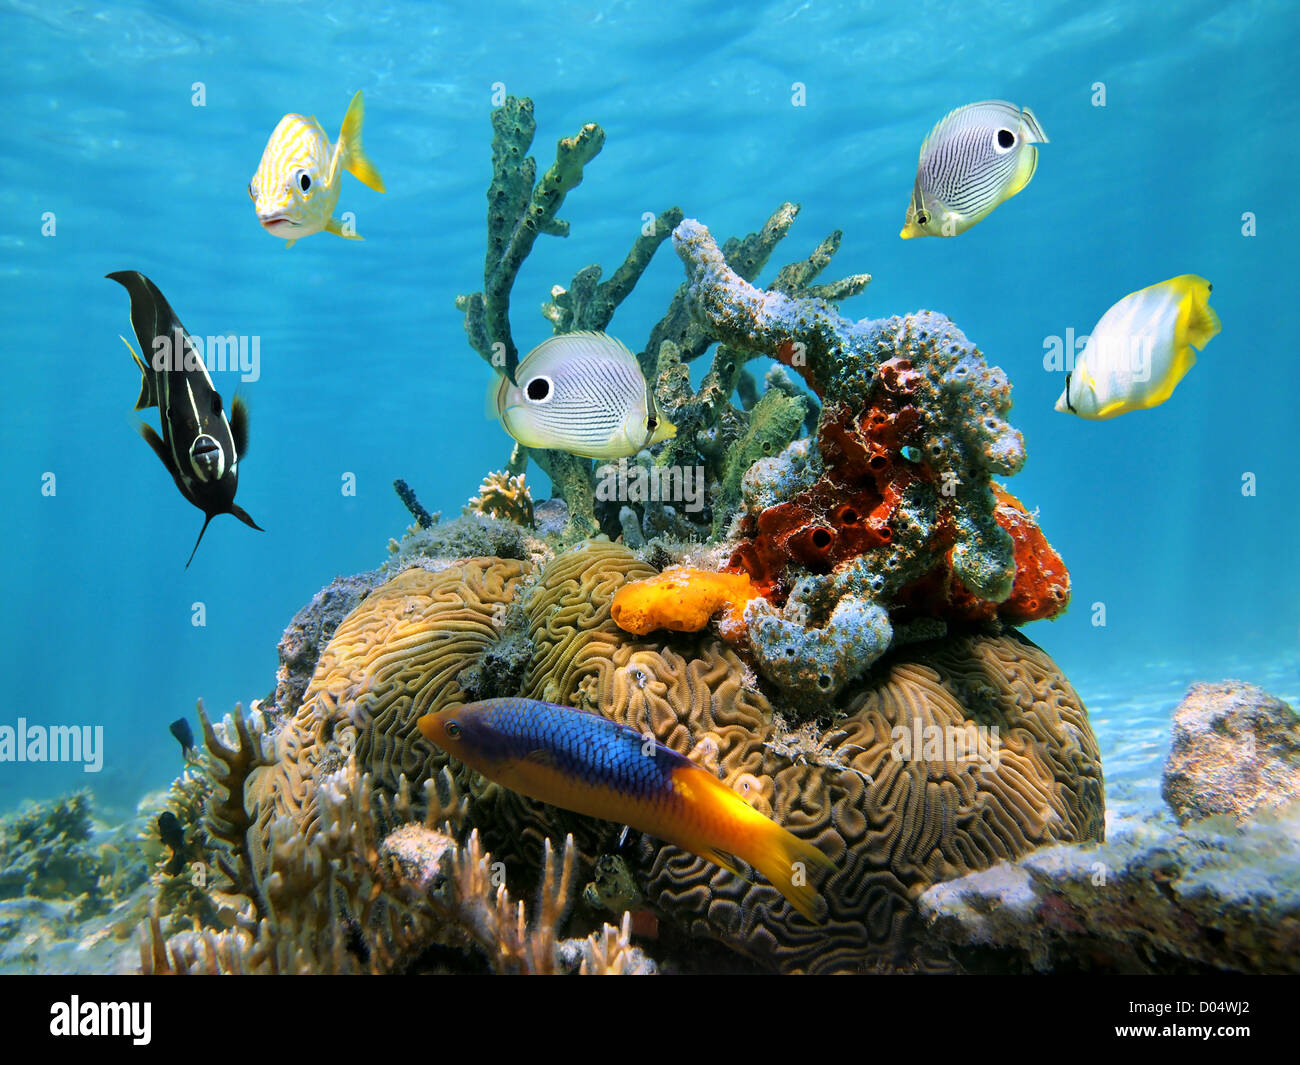 Brain coral with colorful sea sponges and tropical fish in the Caribbean sea Stock Photo